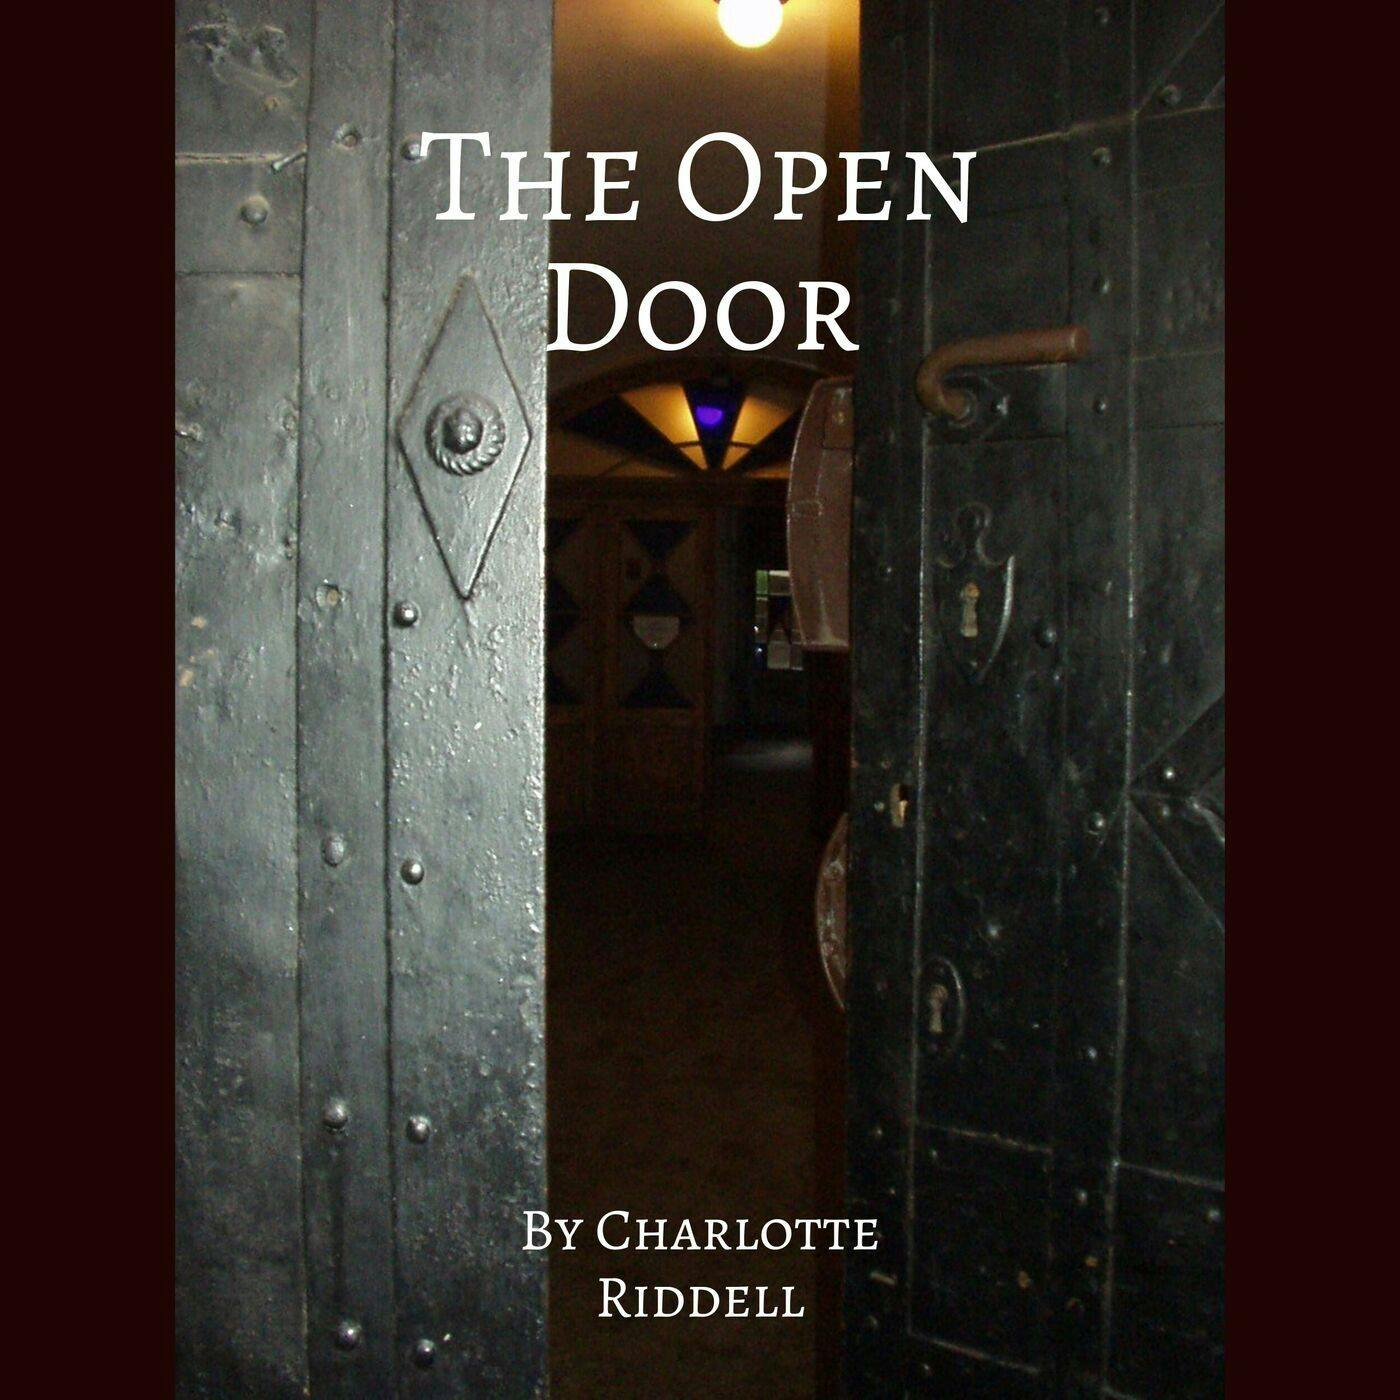 Episode 6: The Open Door by Charlotte Riddell